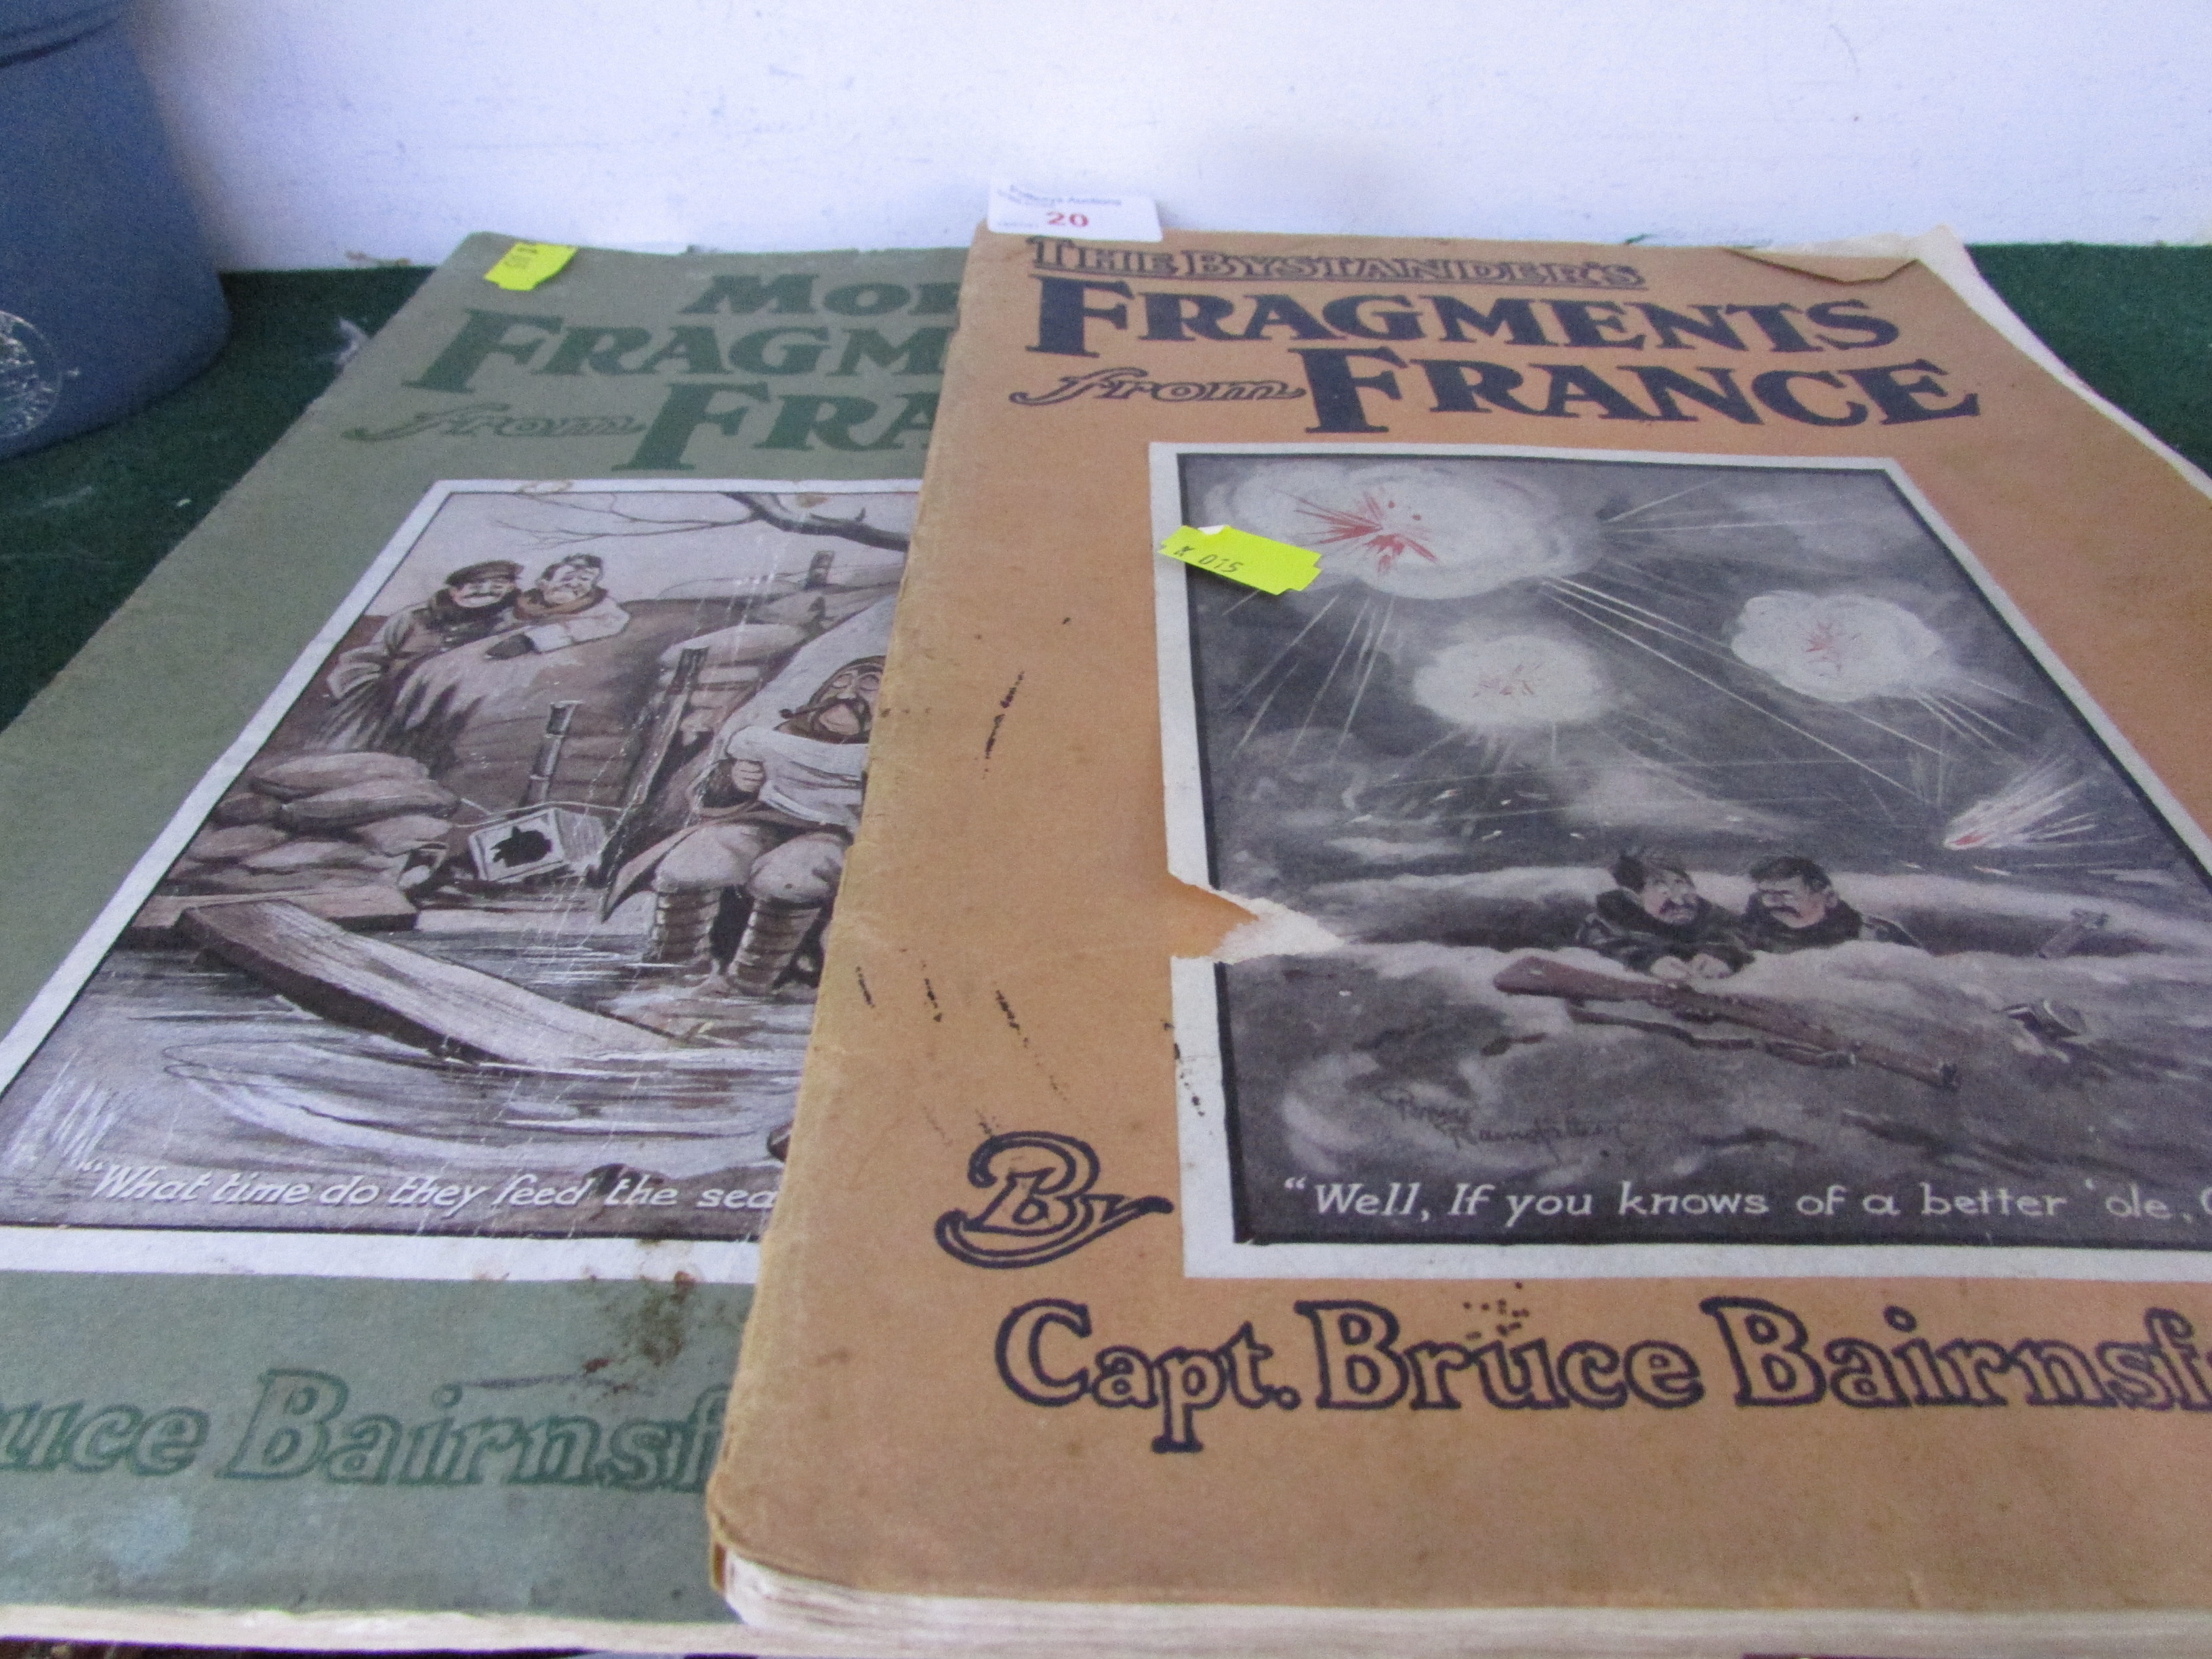 CAPTAIN BRUCE BAIRNSFATHER FRAGMENTS FROM FRANCE AND MORE FRAGMENTS FROM FRANCE - Image 2 of 2